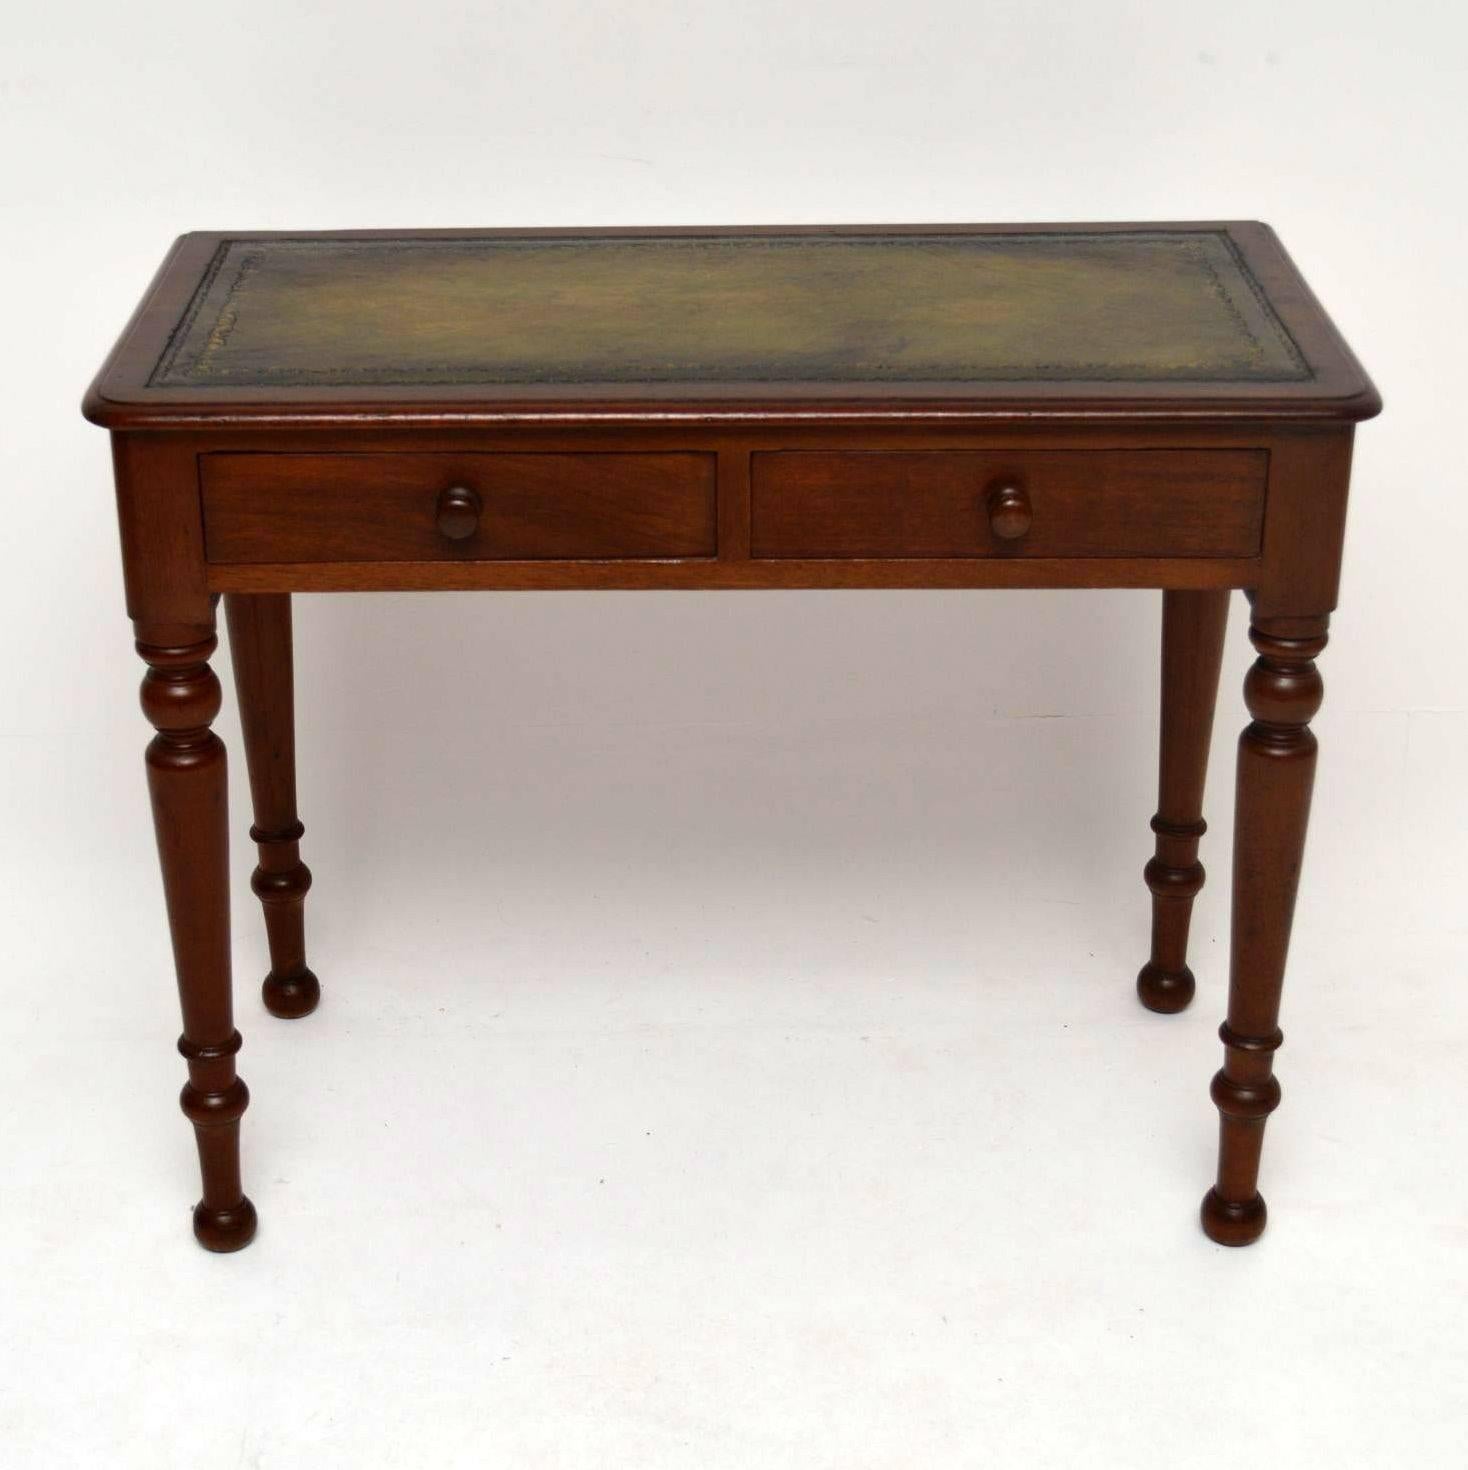 Antique leather top mahogany writing table dating from around the 1860s-1880s period and in good condition. It has a tooled leather writing surface, two drawers and sits on nicely turned legs.

Measures: Length 36.2", 92 cm
Depth 18",